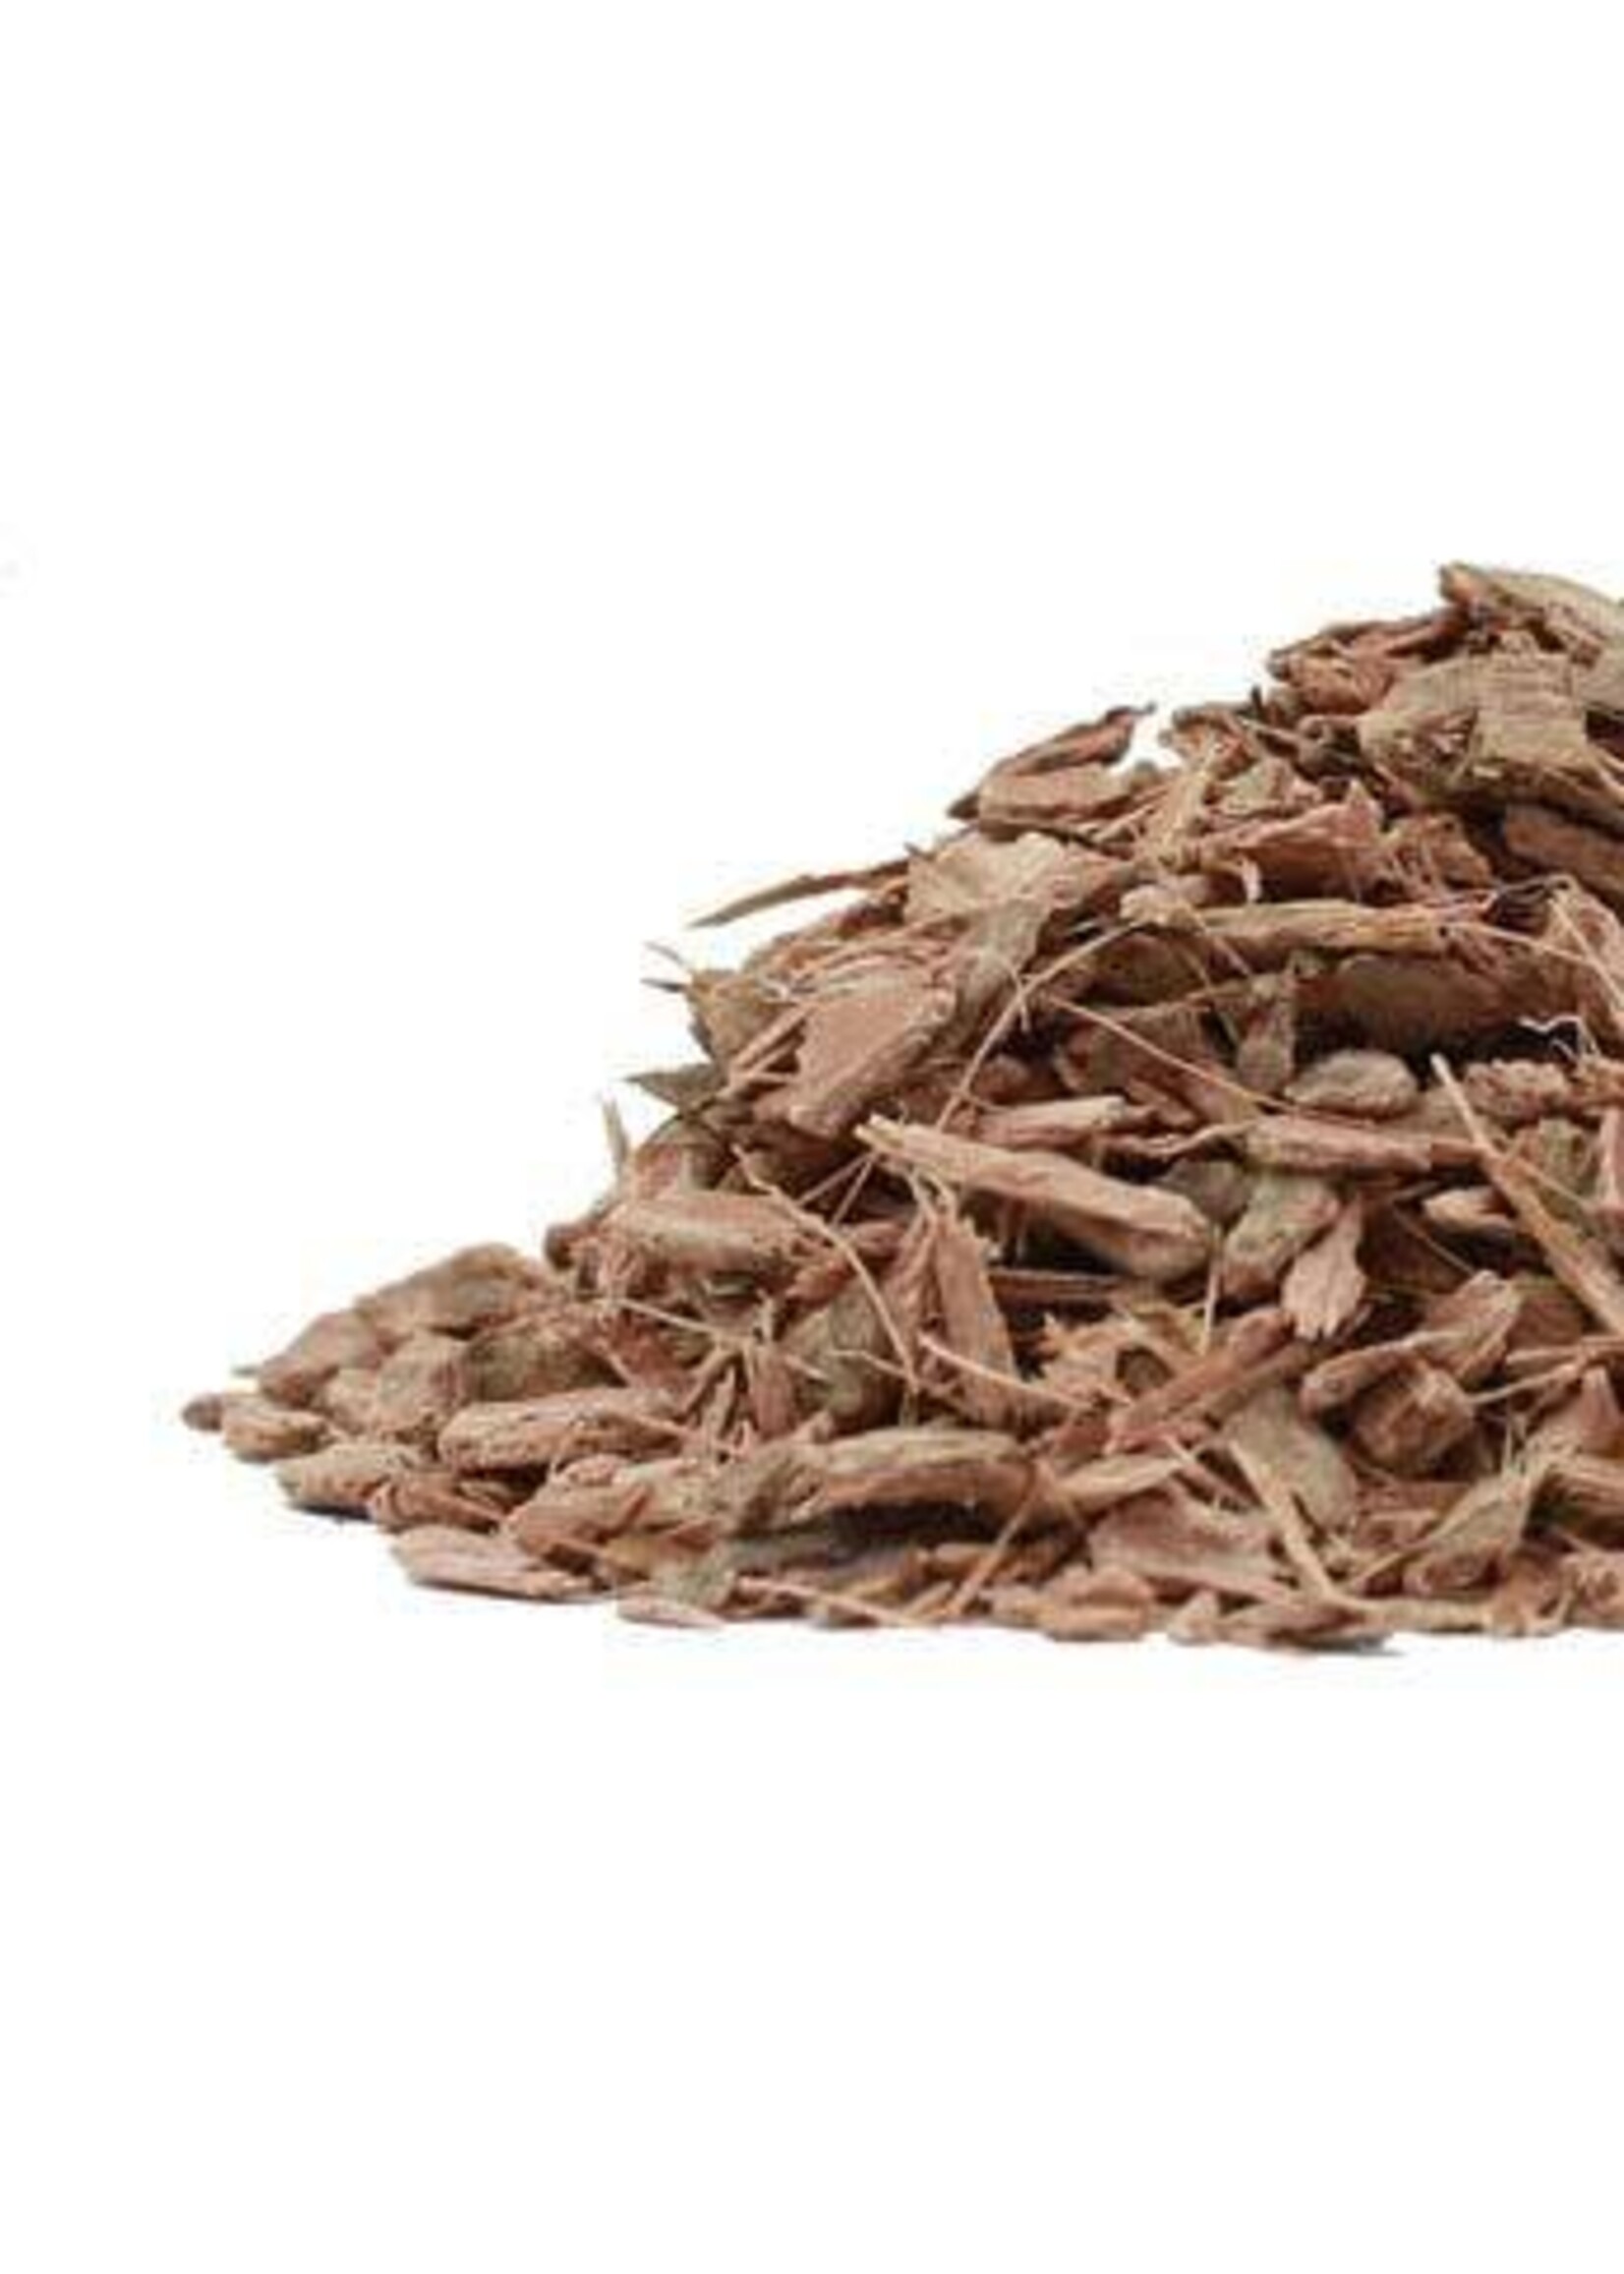 Wildharvested Witch Hazel Bark Sold Per Ounce